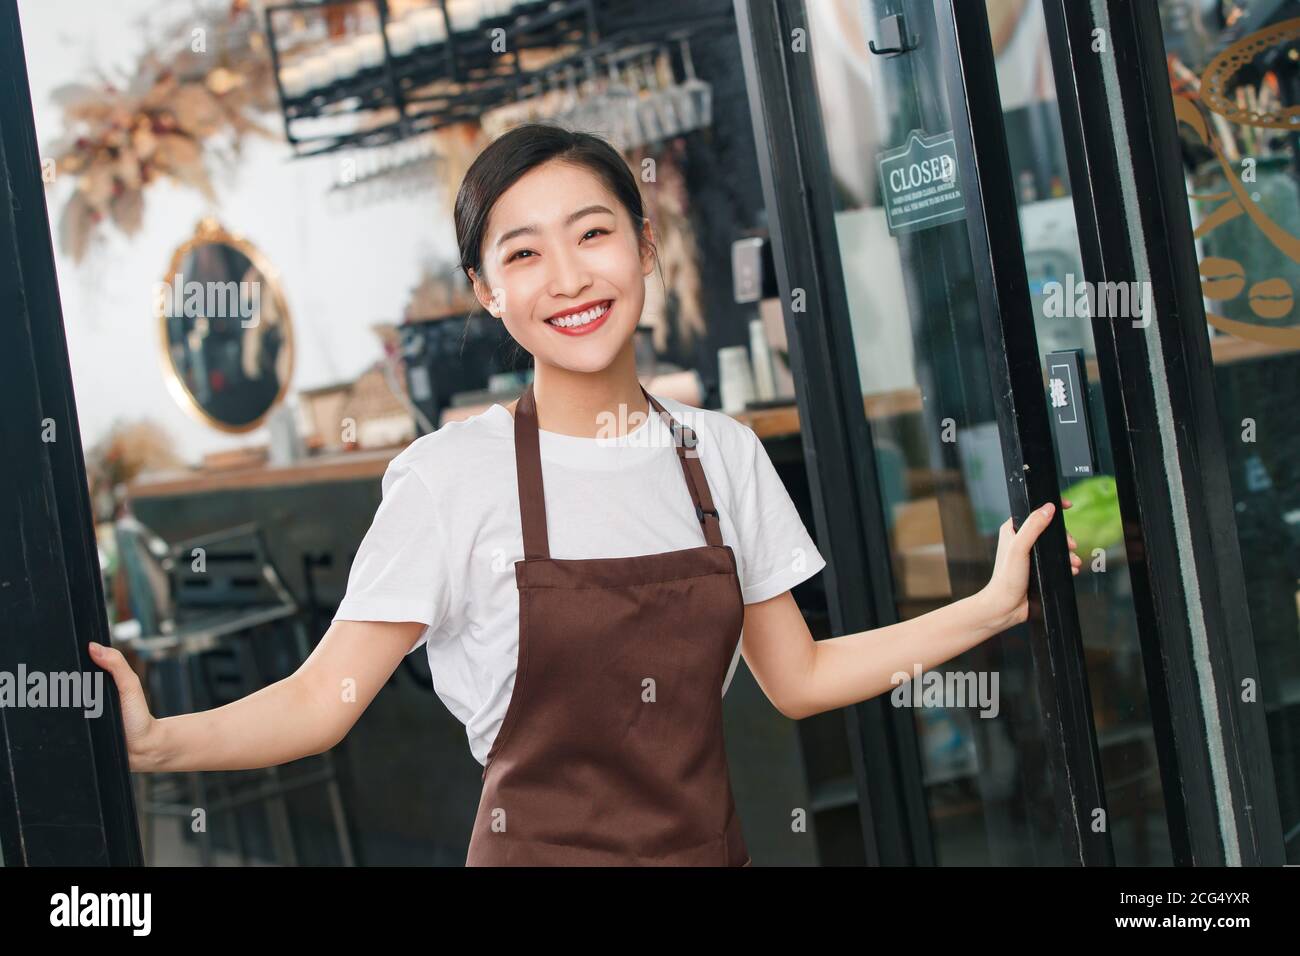 Standing at the door of the cafe waitress Stock Photo